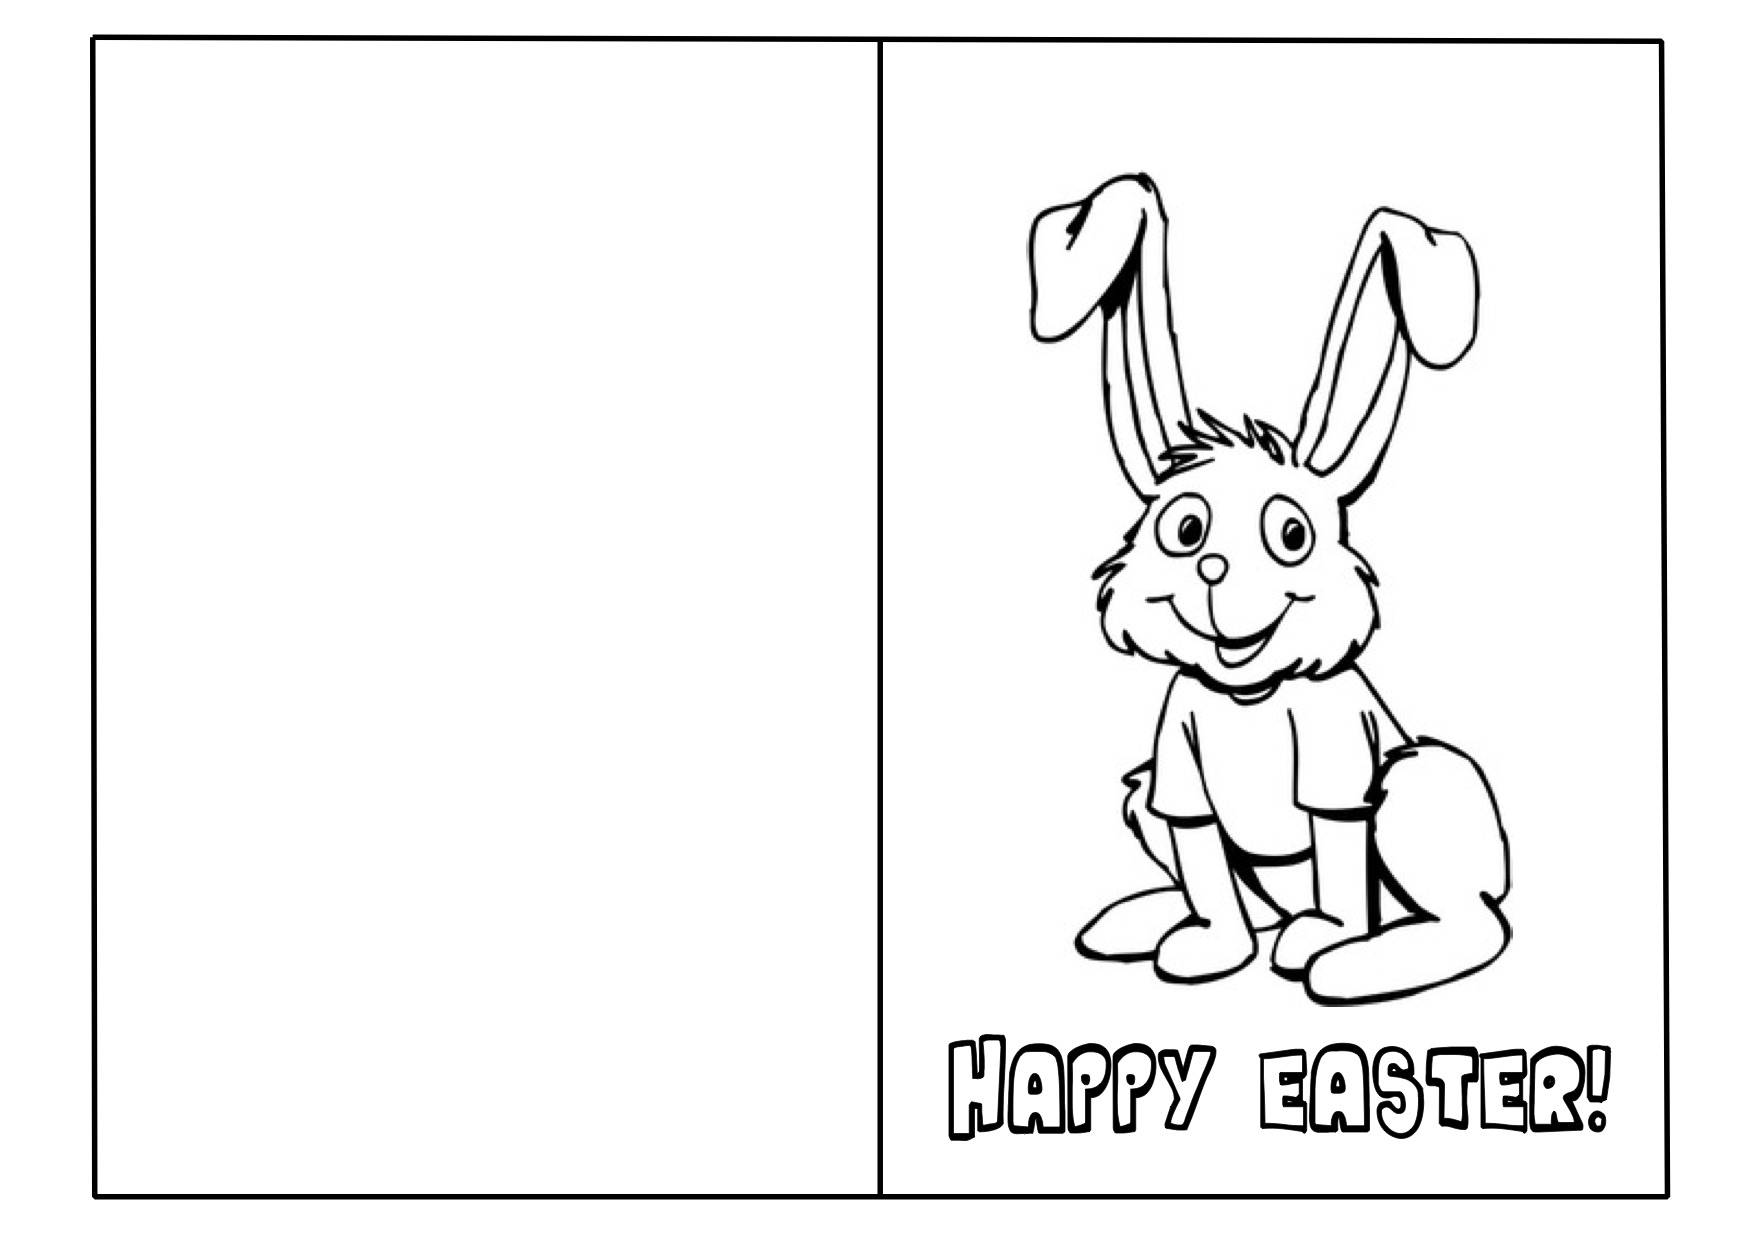 printable-easter-cards-to-color-printable-word-searches